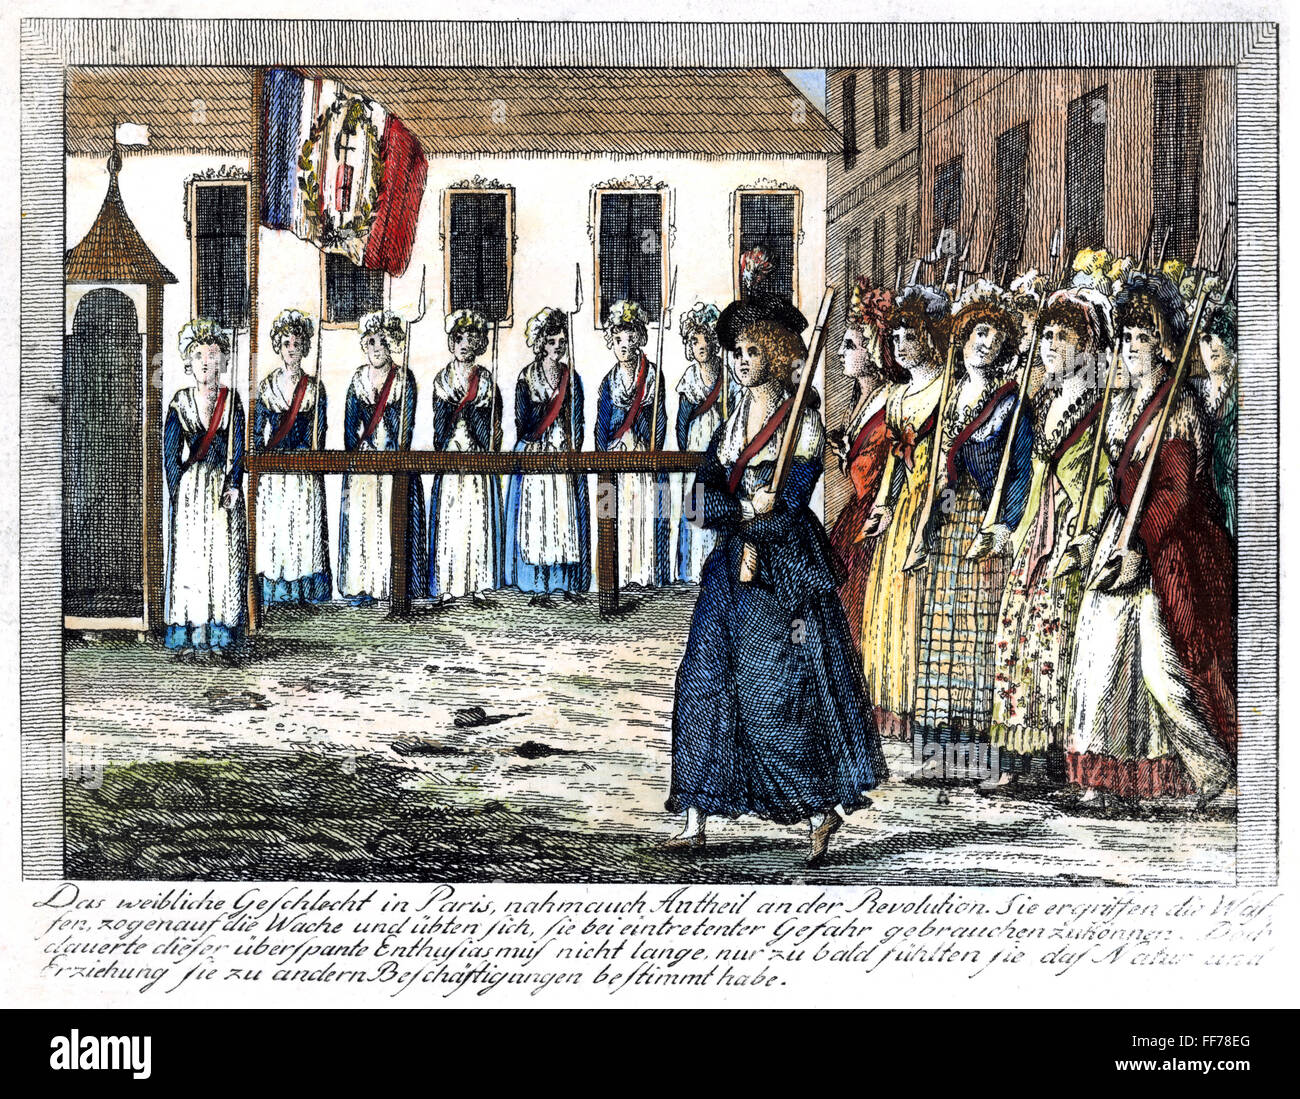 FRENCH REVOLUTION, 1789. /nRevolutionary guardswomen of Paris, France, during the initial fervor of the revolution. Contemporary German line engraving. Stock Photo